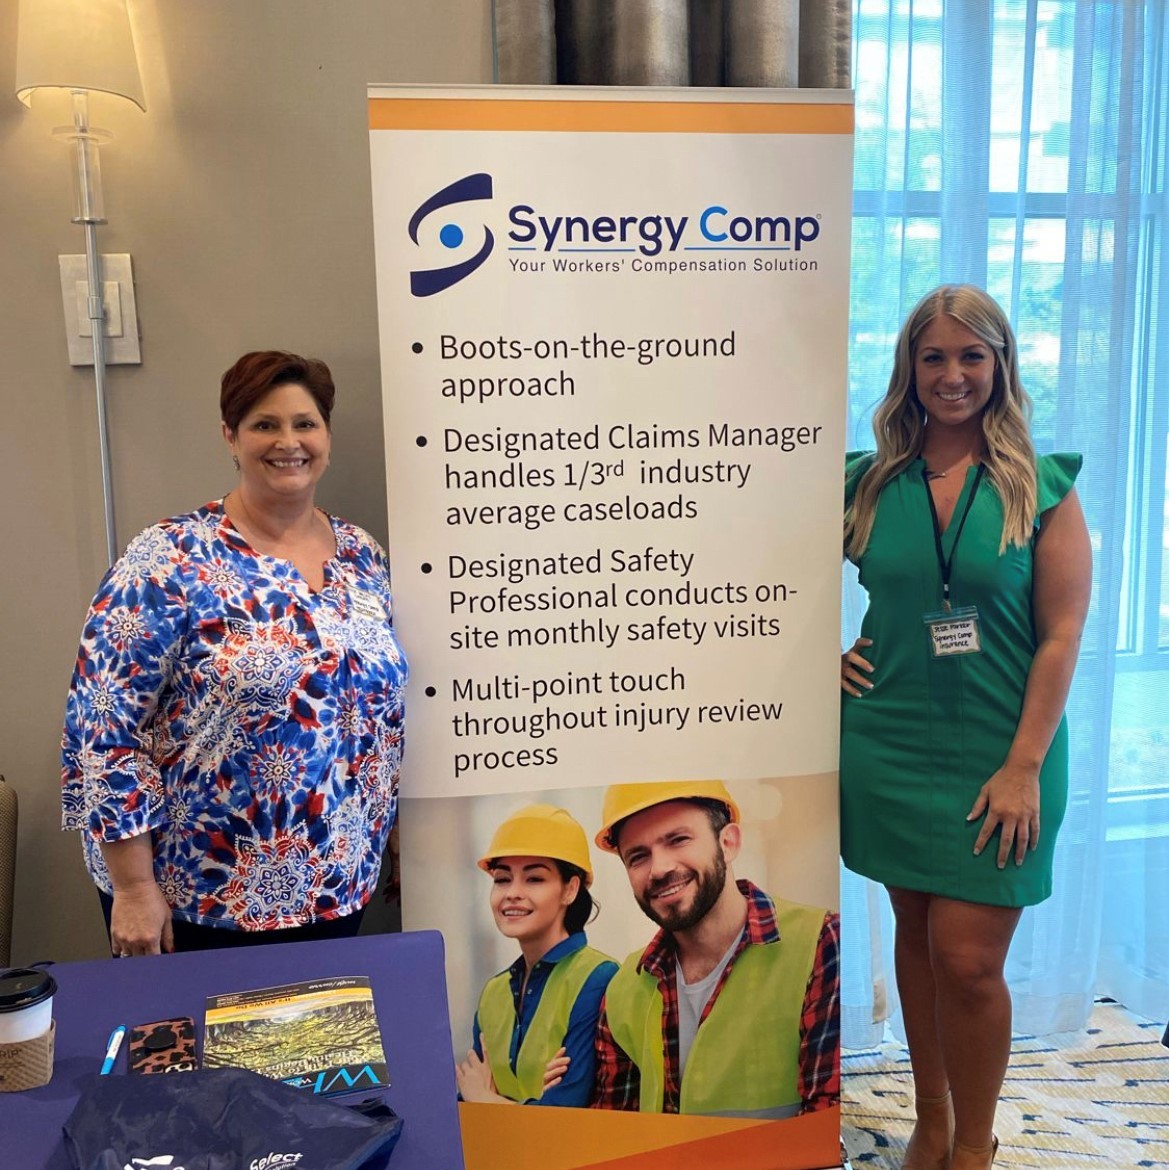 Our Southern Claims Team members representing Synergy Comp at the Atlanta Workers' Compensation Conference